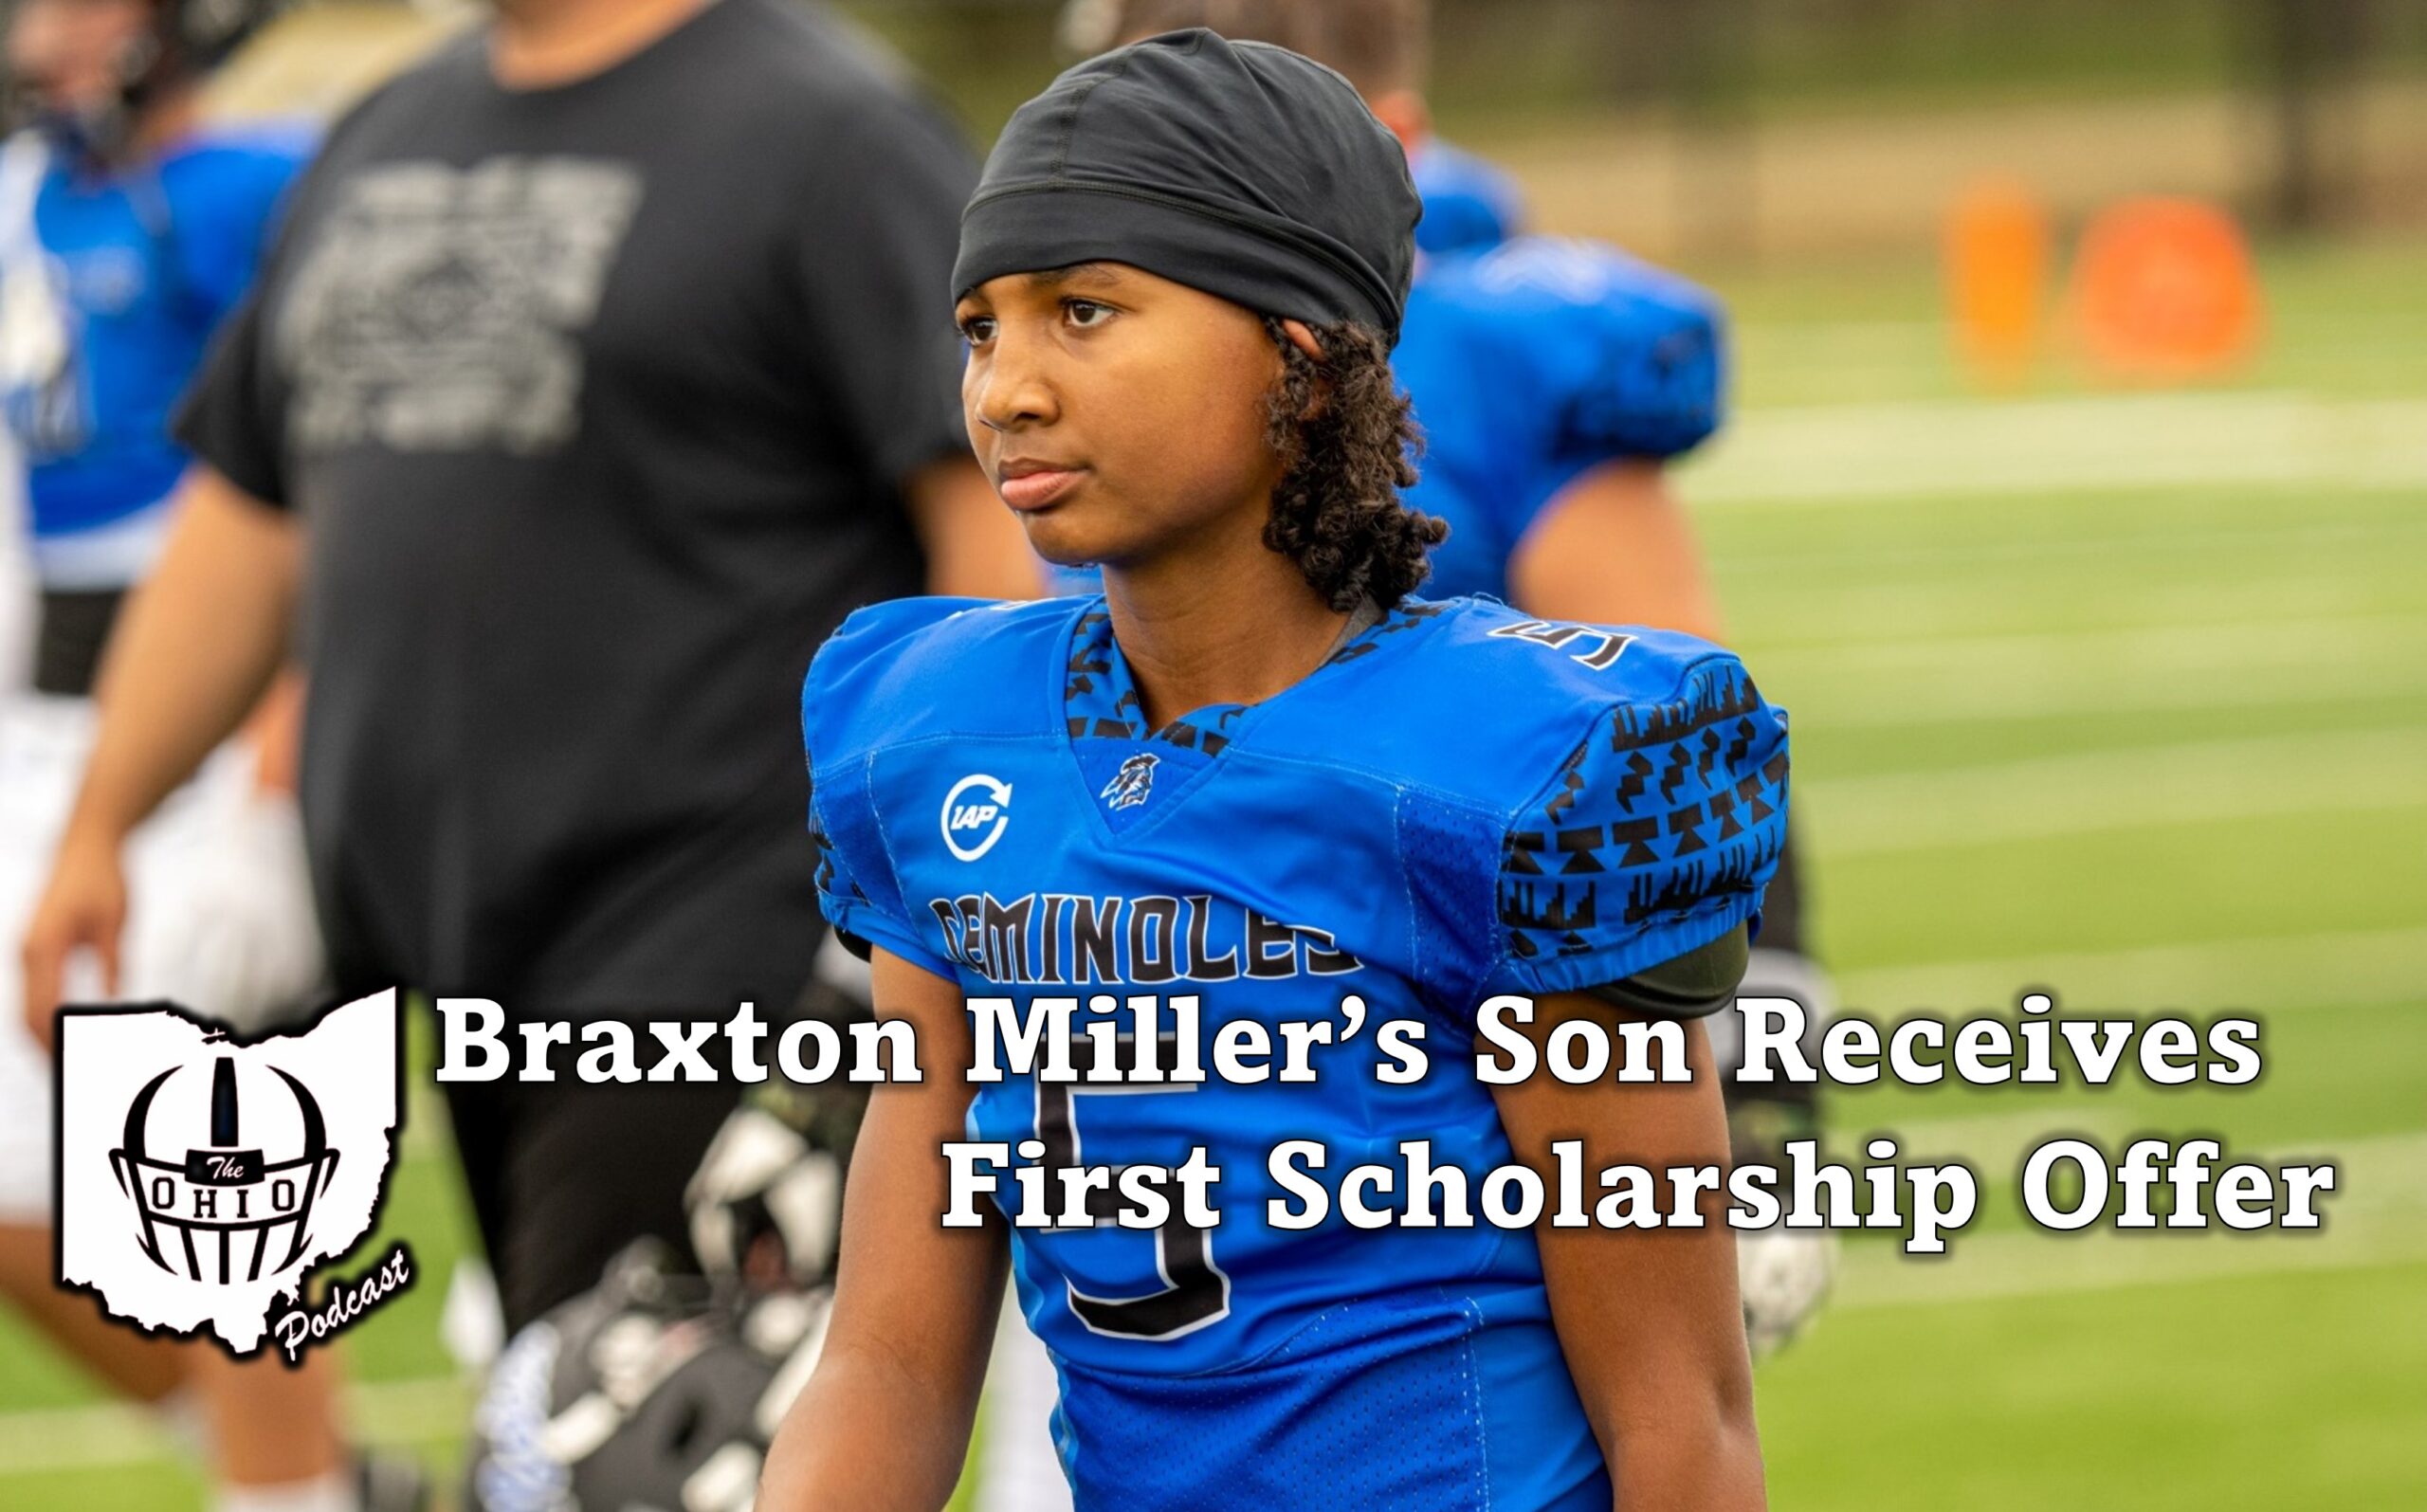 Braxton Miller’s Son Enters the Sixth Grade with a Division I Scholarship Offer